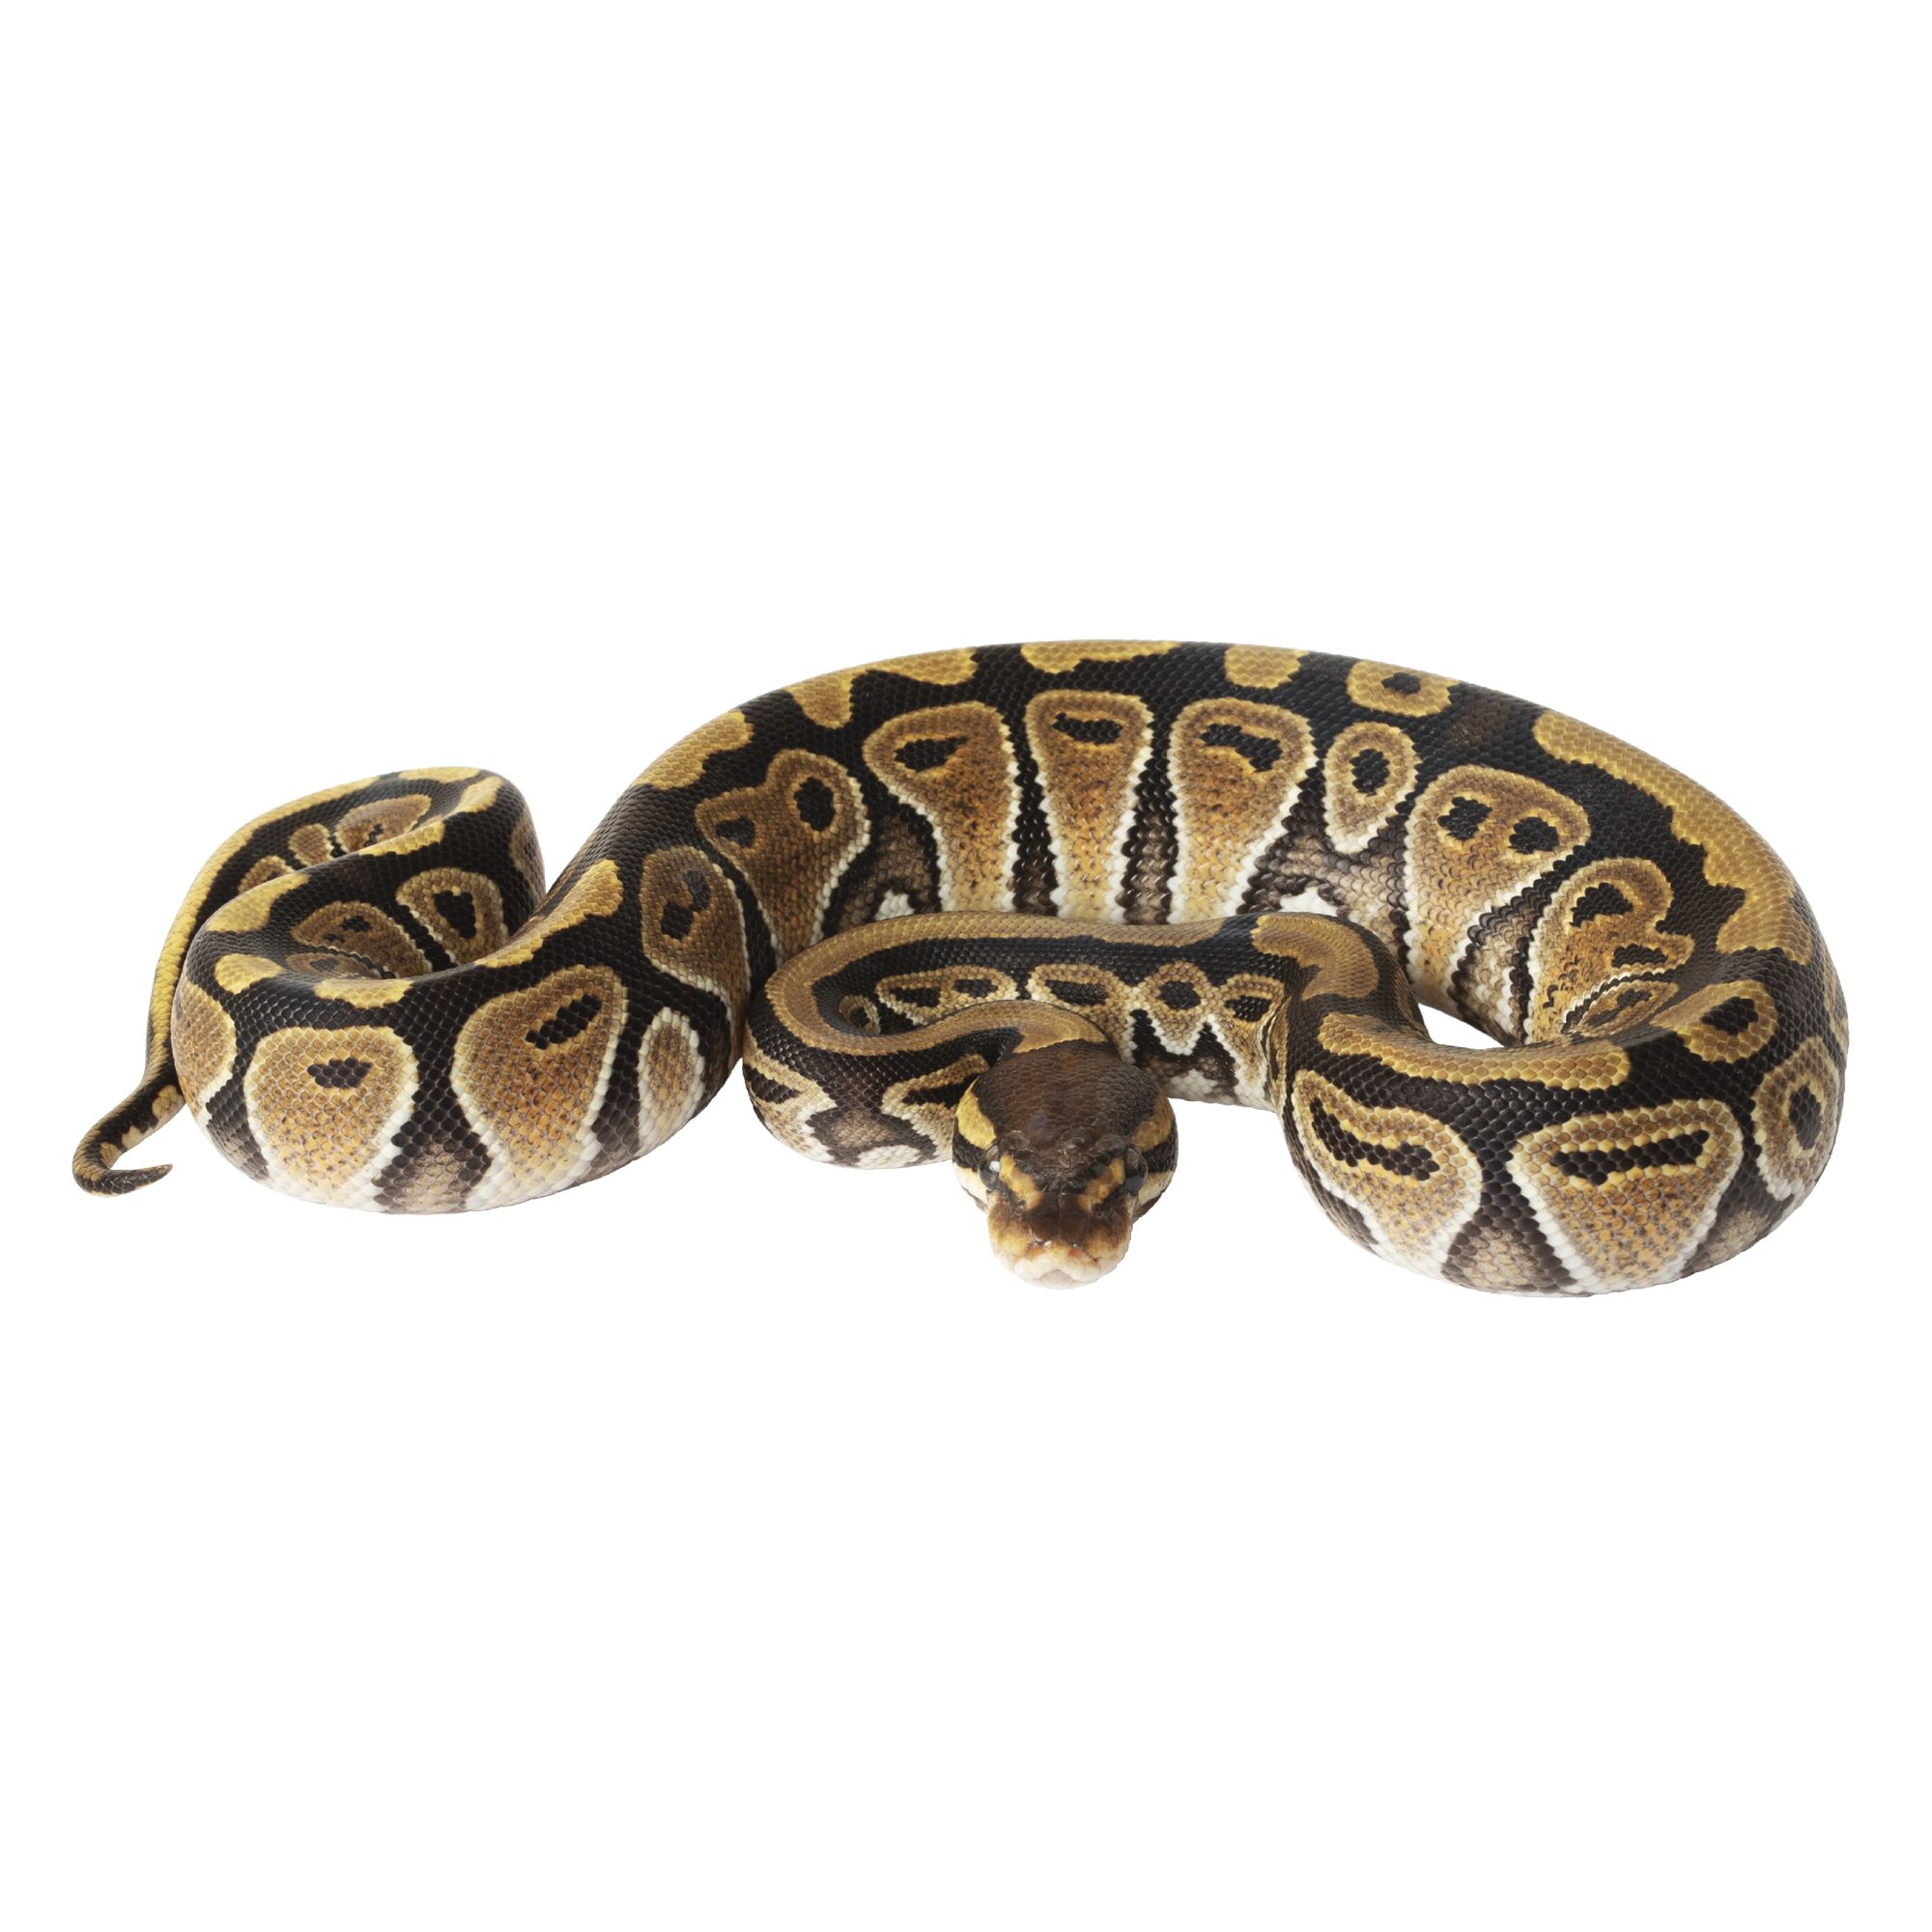 Boa and reticulated python - pets - craigslist